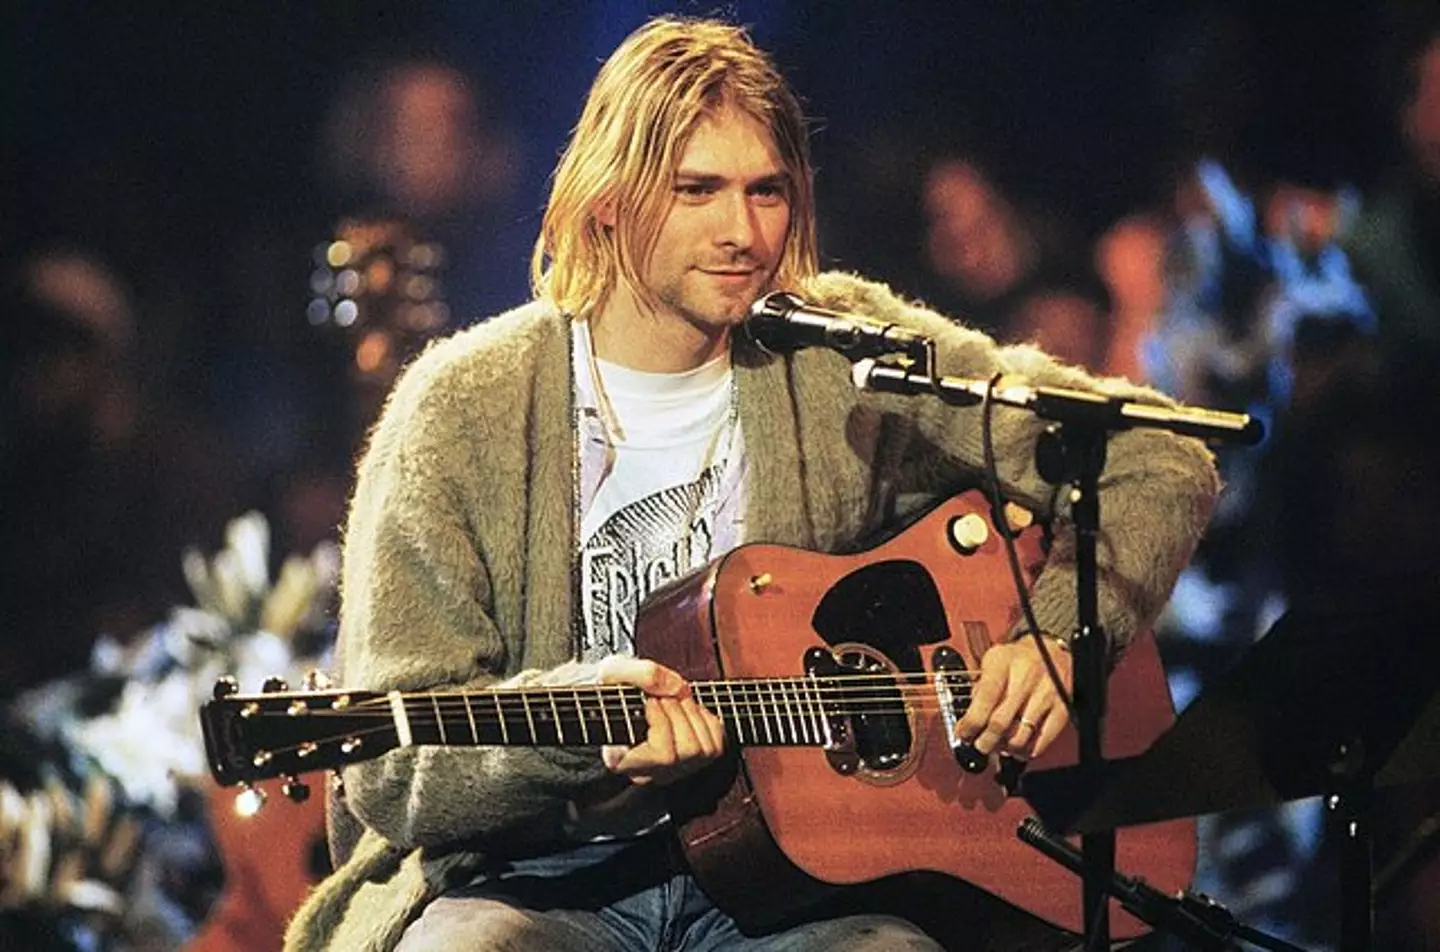 Kurt Cobain of Nirvana performs at a taping of 'MTV Unplugged' on Nov. 18, 1993 in New York City.